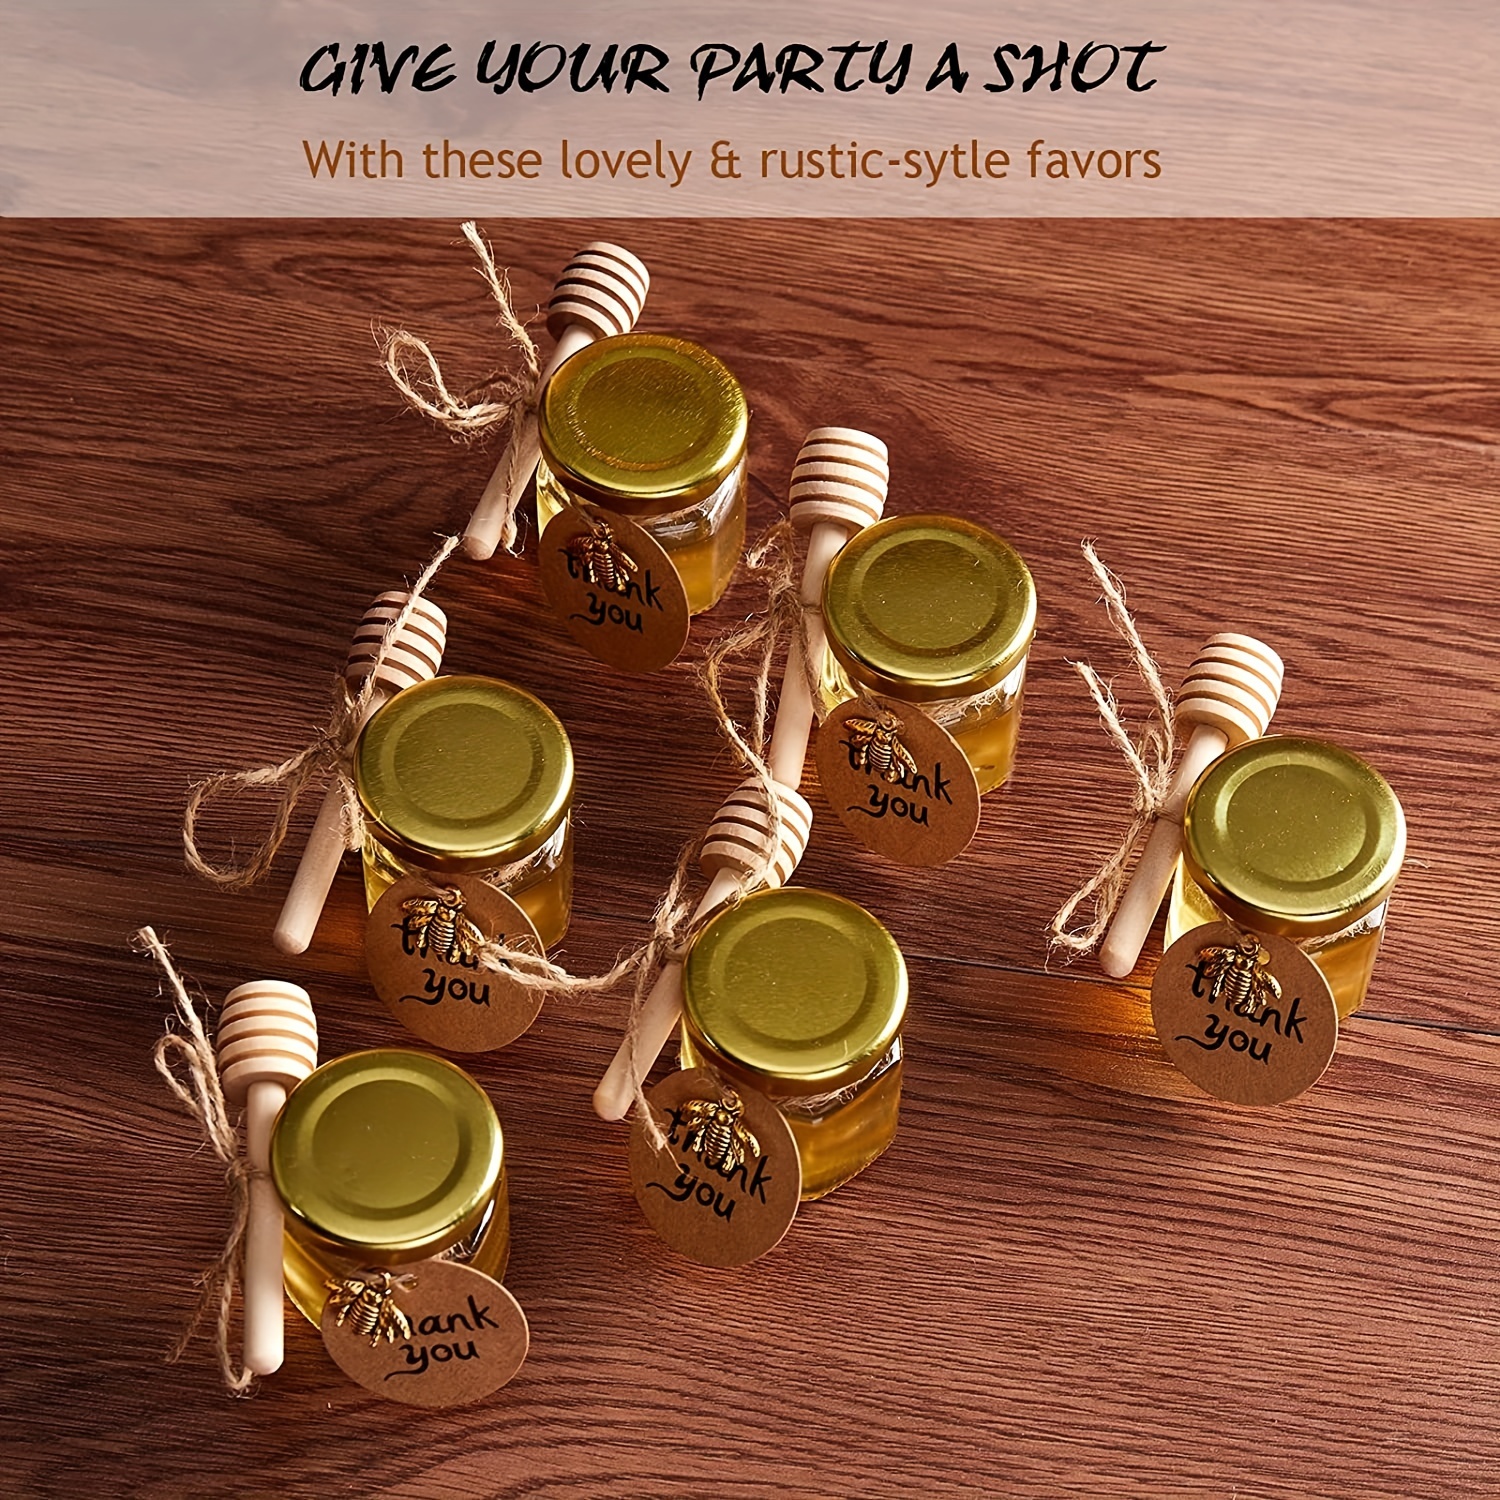 Hexagon Glass Jars Premium Food-grade. Mini Jars With Lids For Gifts,  Wedding Favors, Honey, Jams And More